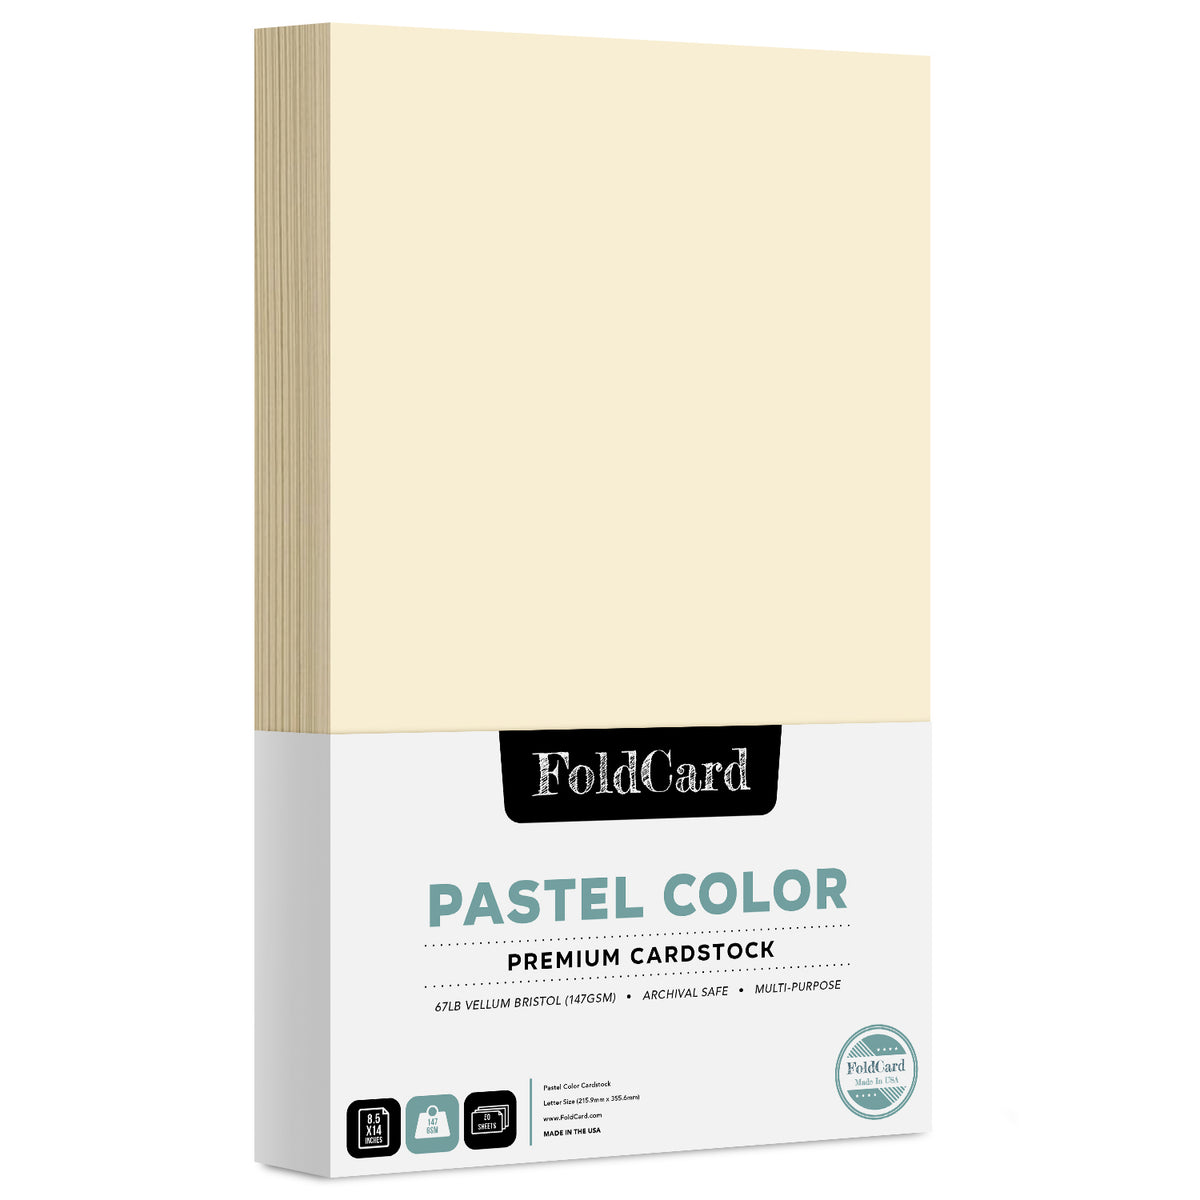 Premium Quality Pastel  Color Cardstock: 11 x 17 - 50 Sheets of 67lb Cover Weight